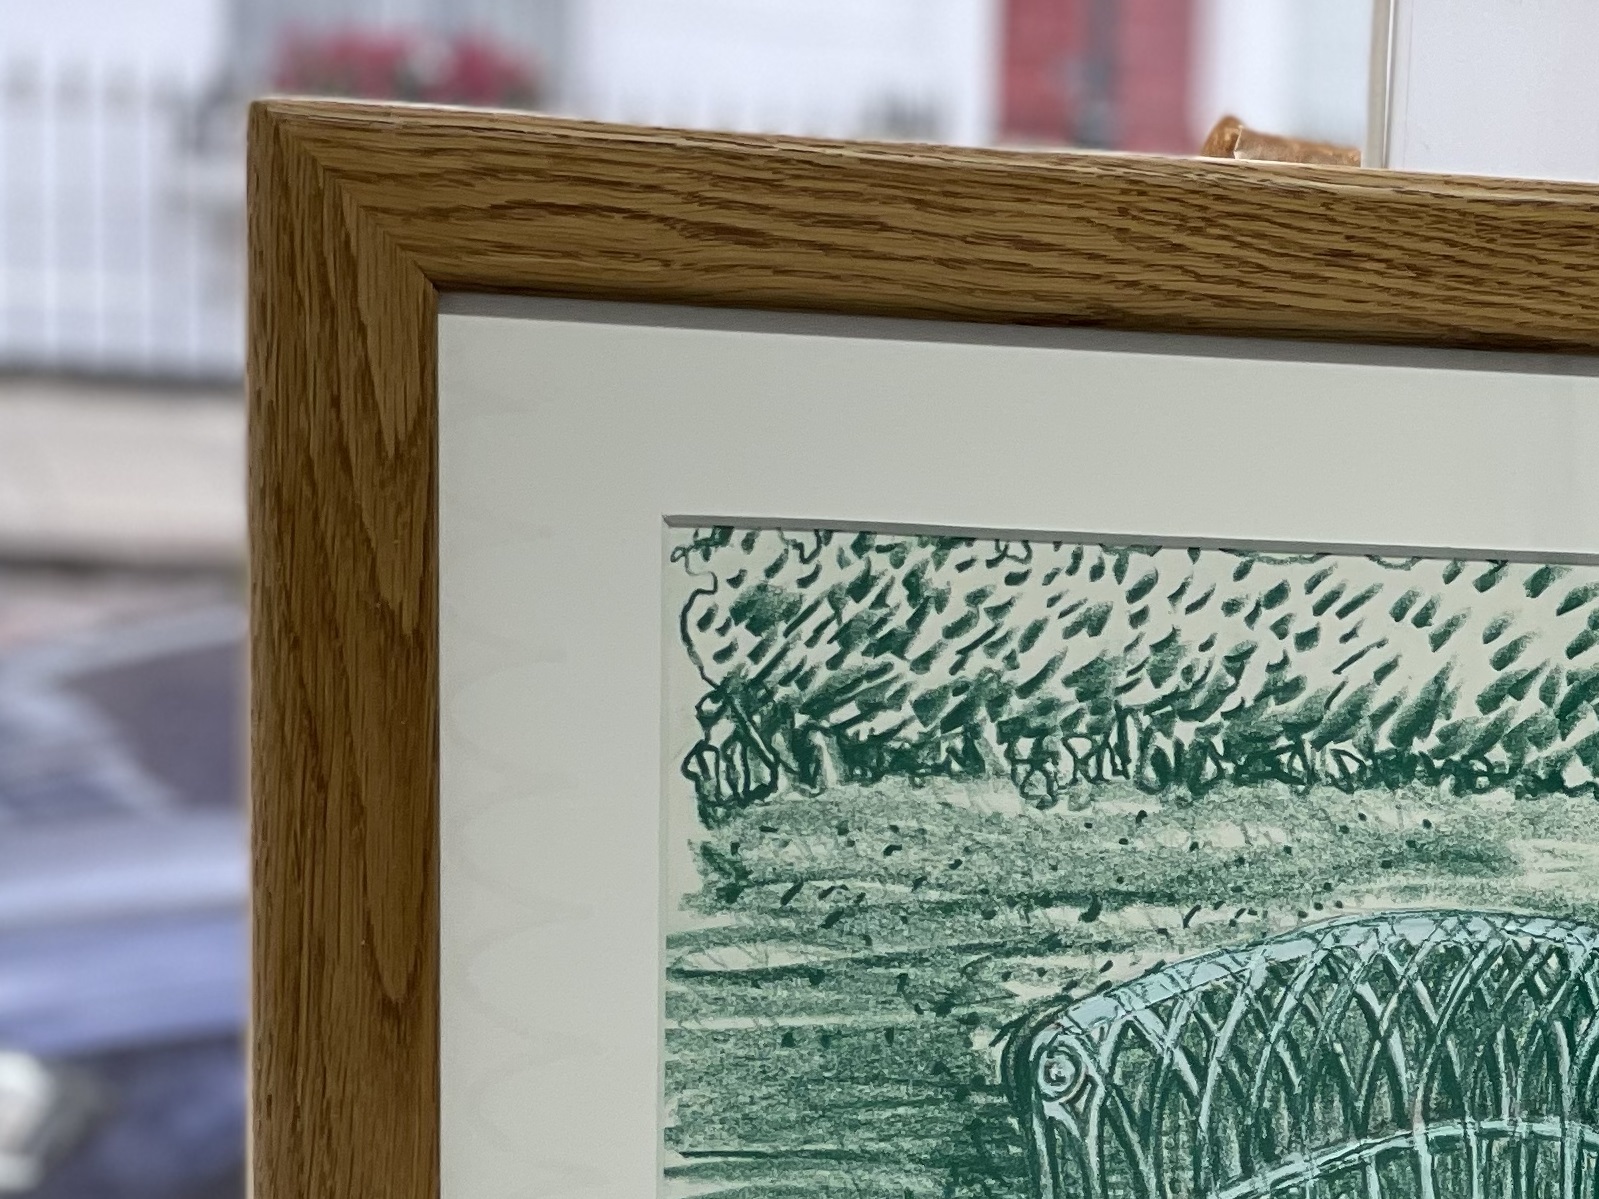 Hand-finished natural oak frame with light wax